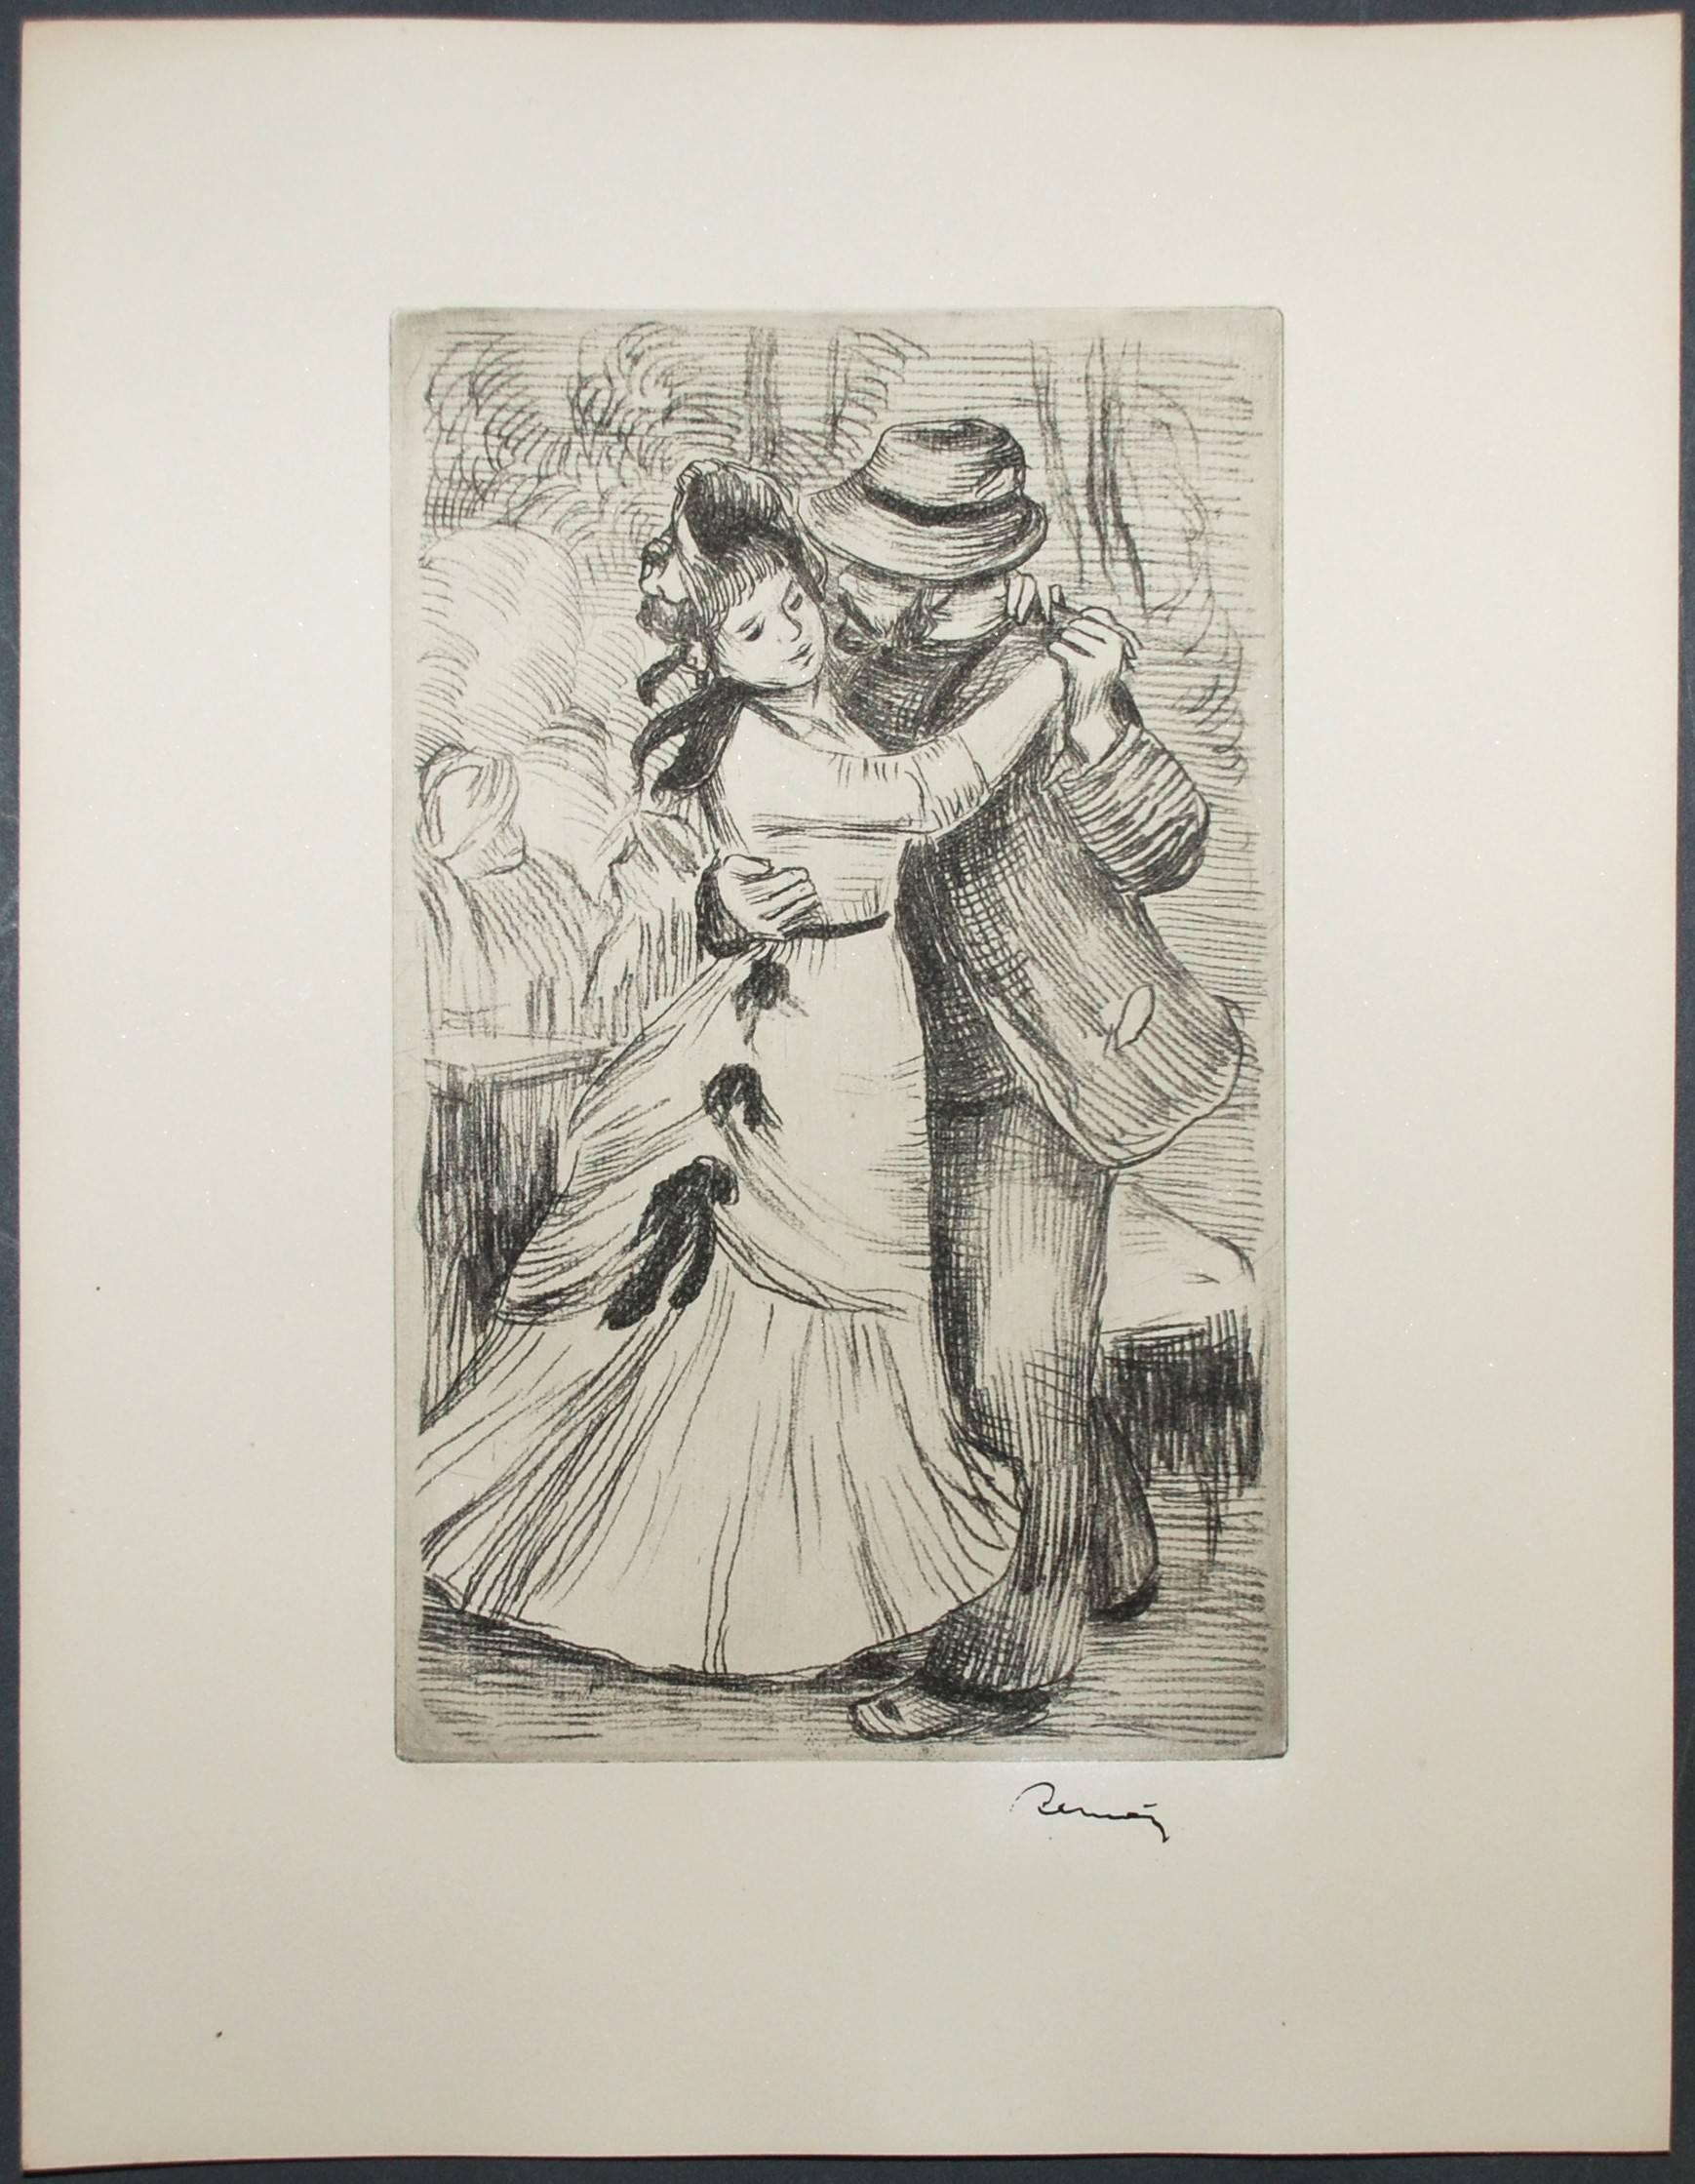 Artist: Pierre-Auguste Renoir
Medium: Original etching
Title: La Danse a la Campagne (2nd Plate)
Year: 1890
Framed Size: 20 1/2 x 17 inches
Sheet Size: 13 x 10 inches
Reference: Delteil 2
Signed: Stamped signature